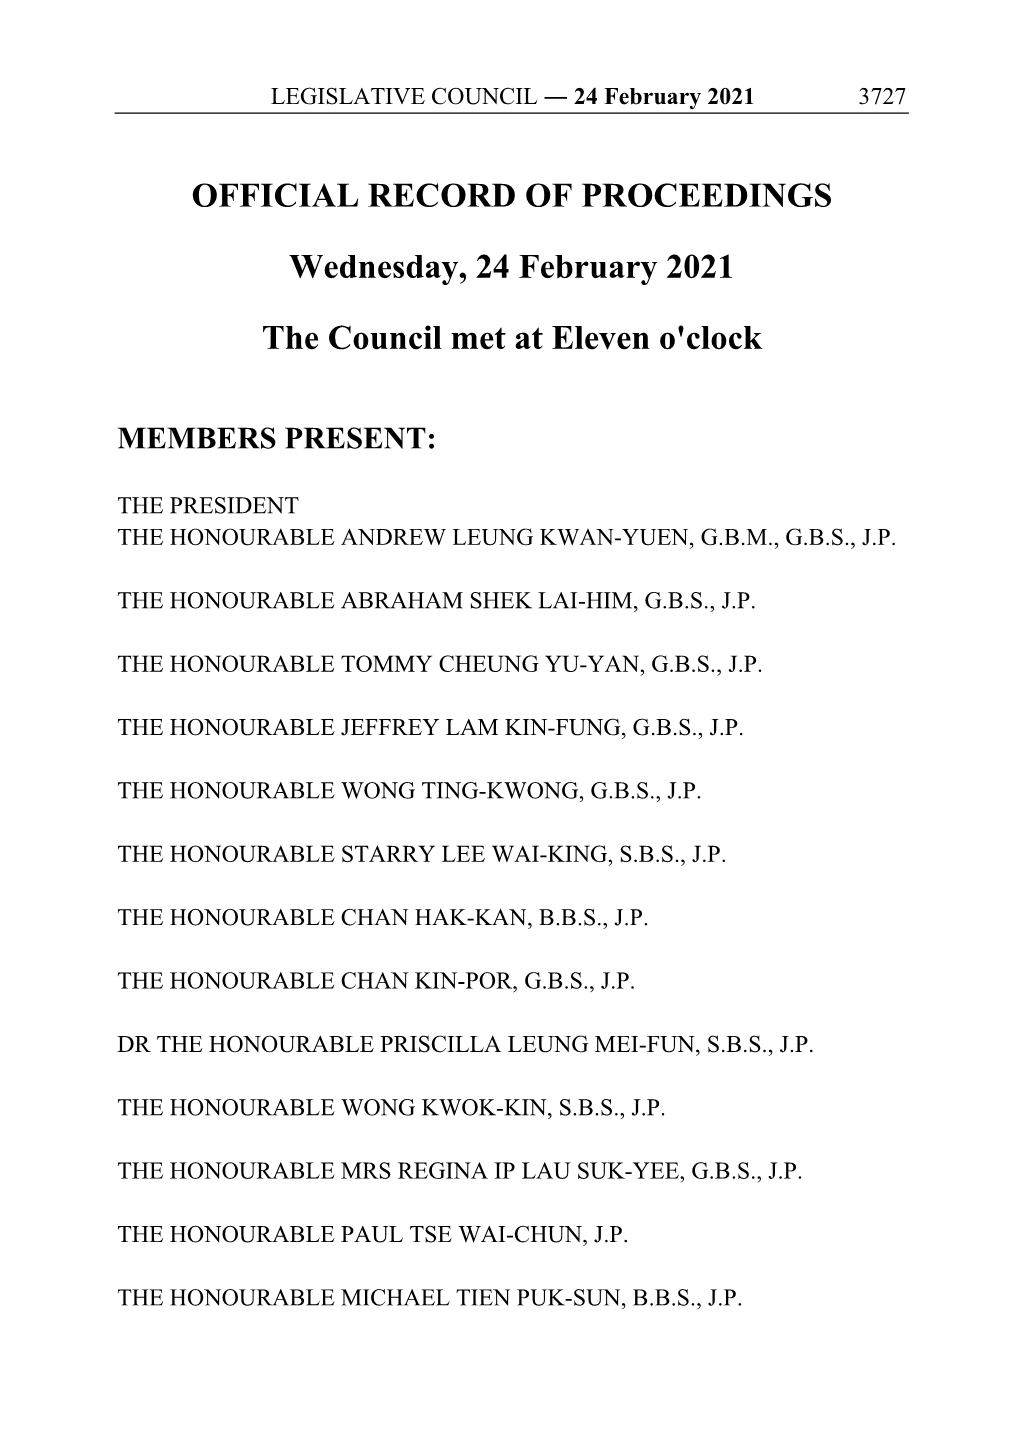 OFFICIAL RECORD of PROCEEDINGS Wednesday, 24